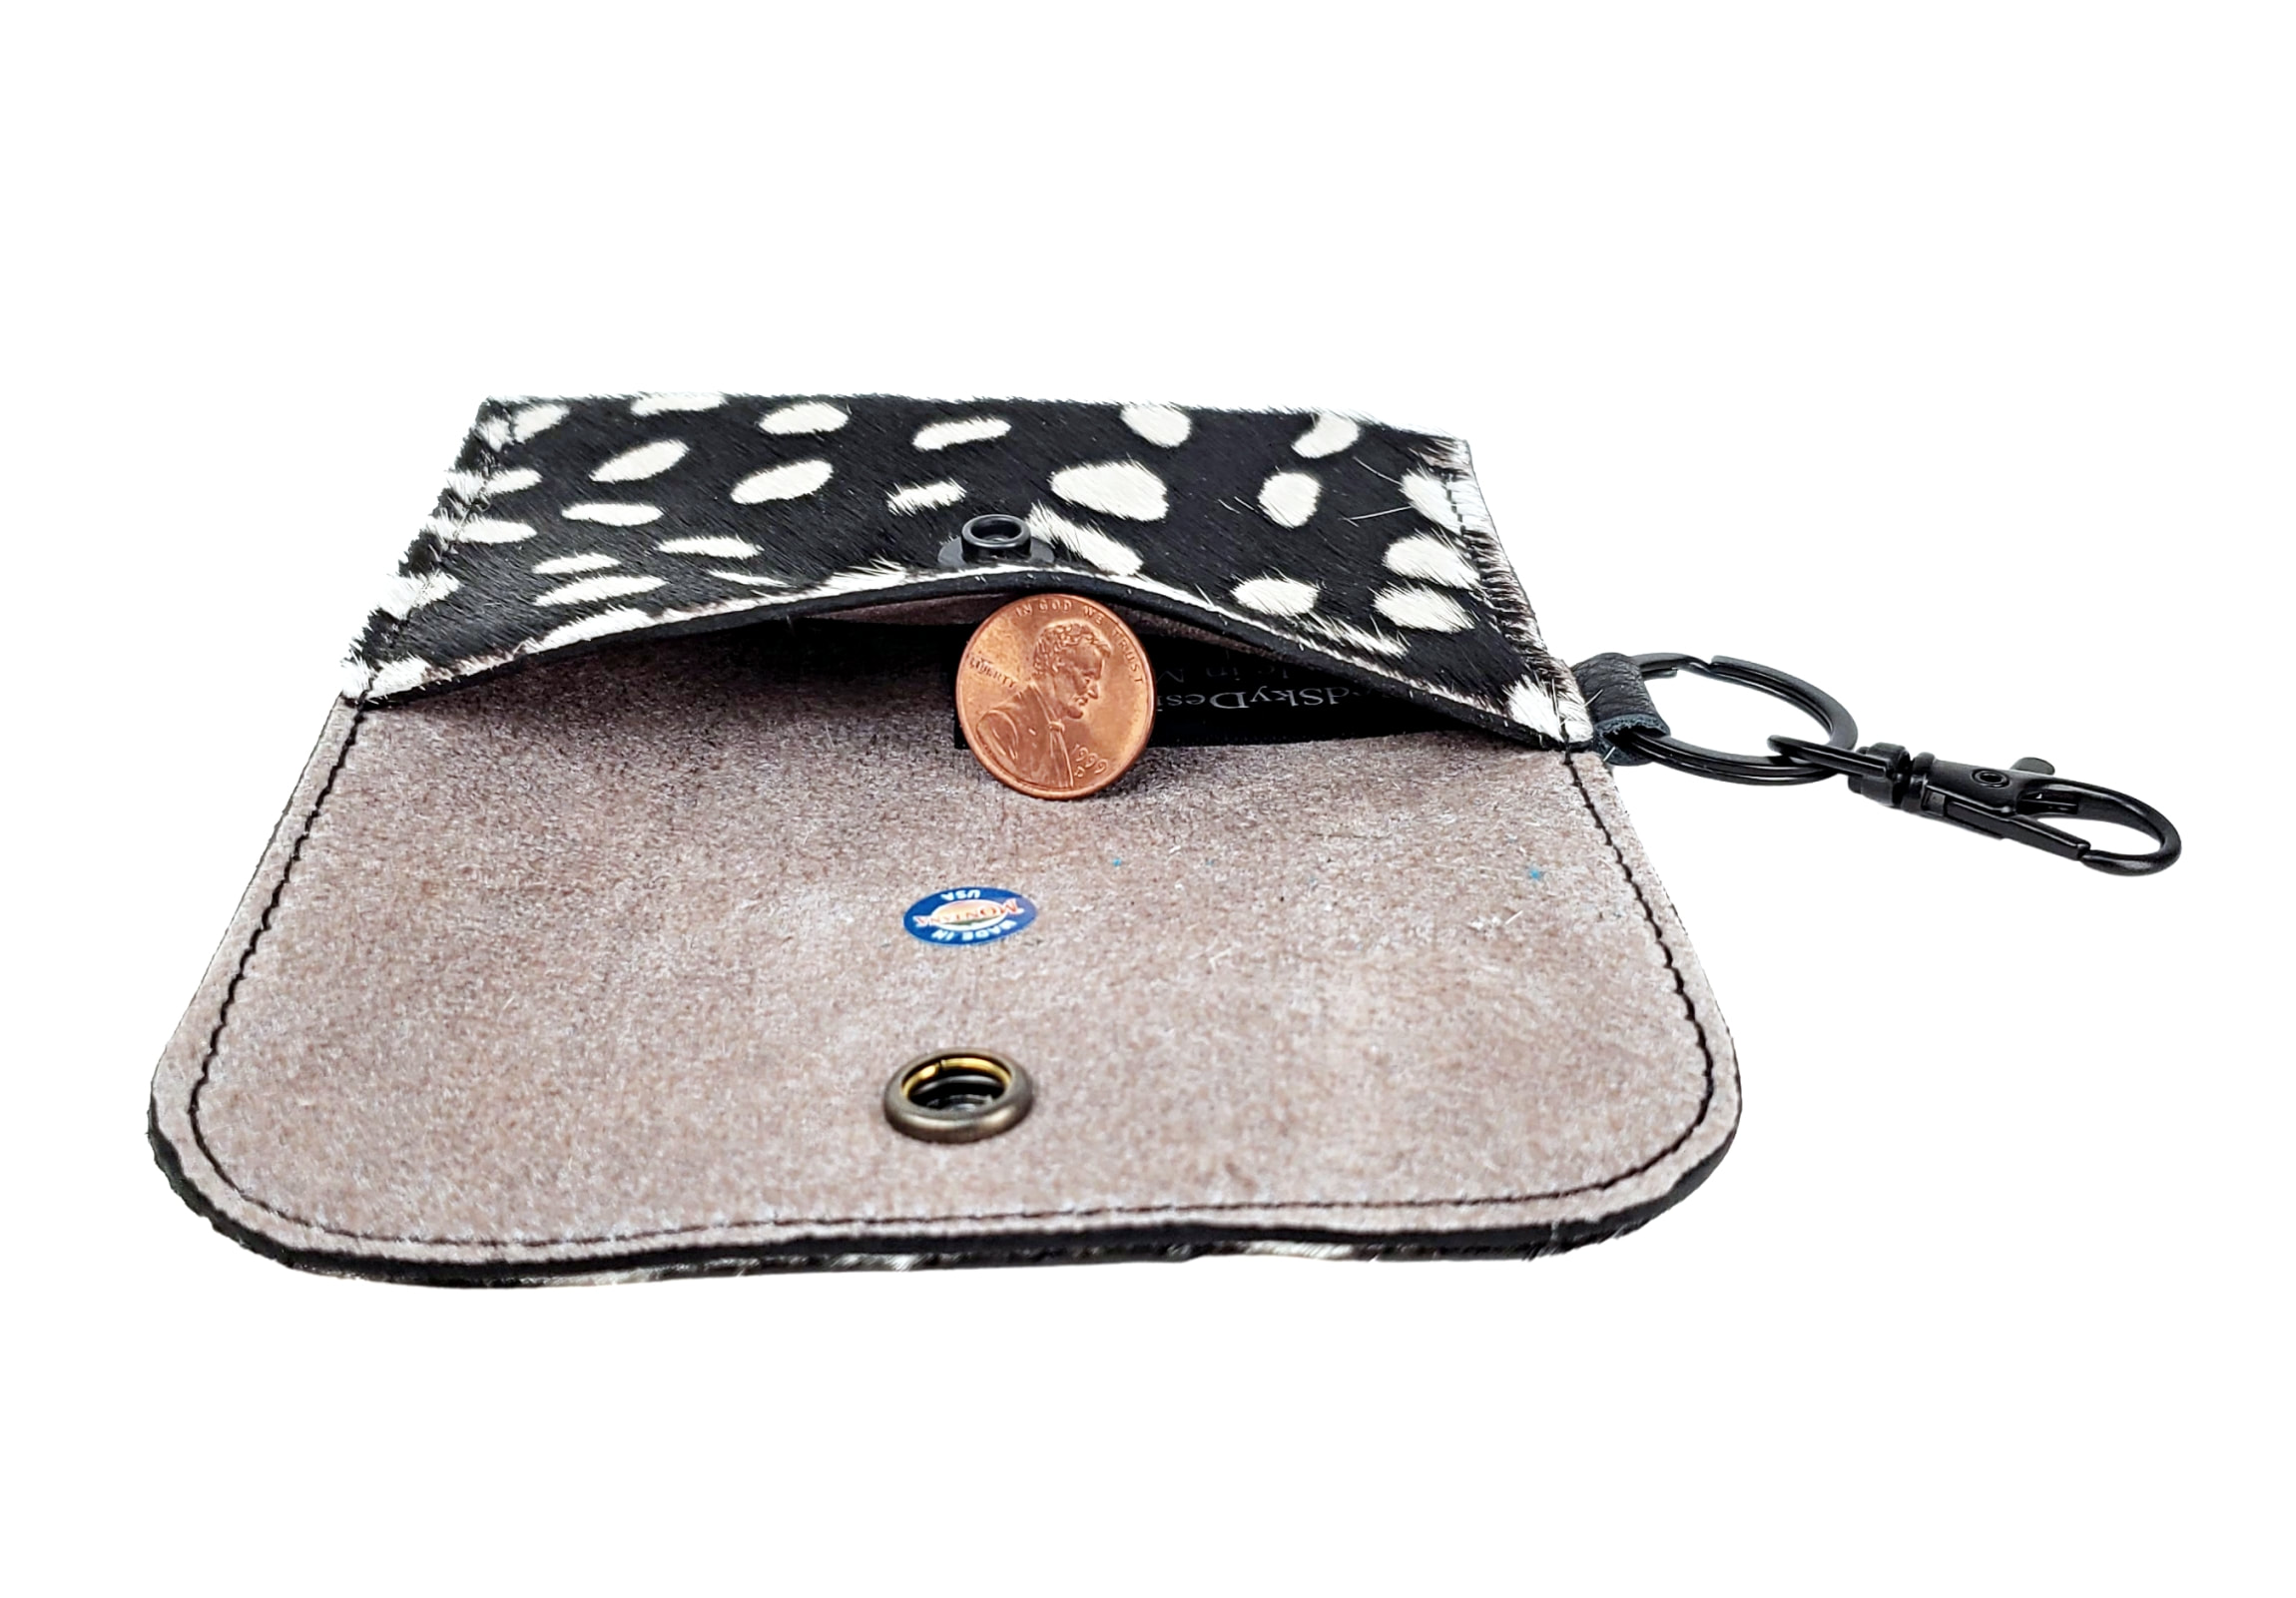 Key Chain ID Card Wallet, Cowhide Leather, Business Card Holder, Keep Cards  Secure, Clip Inside Large Purse to Grab & Go